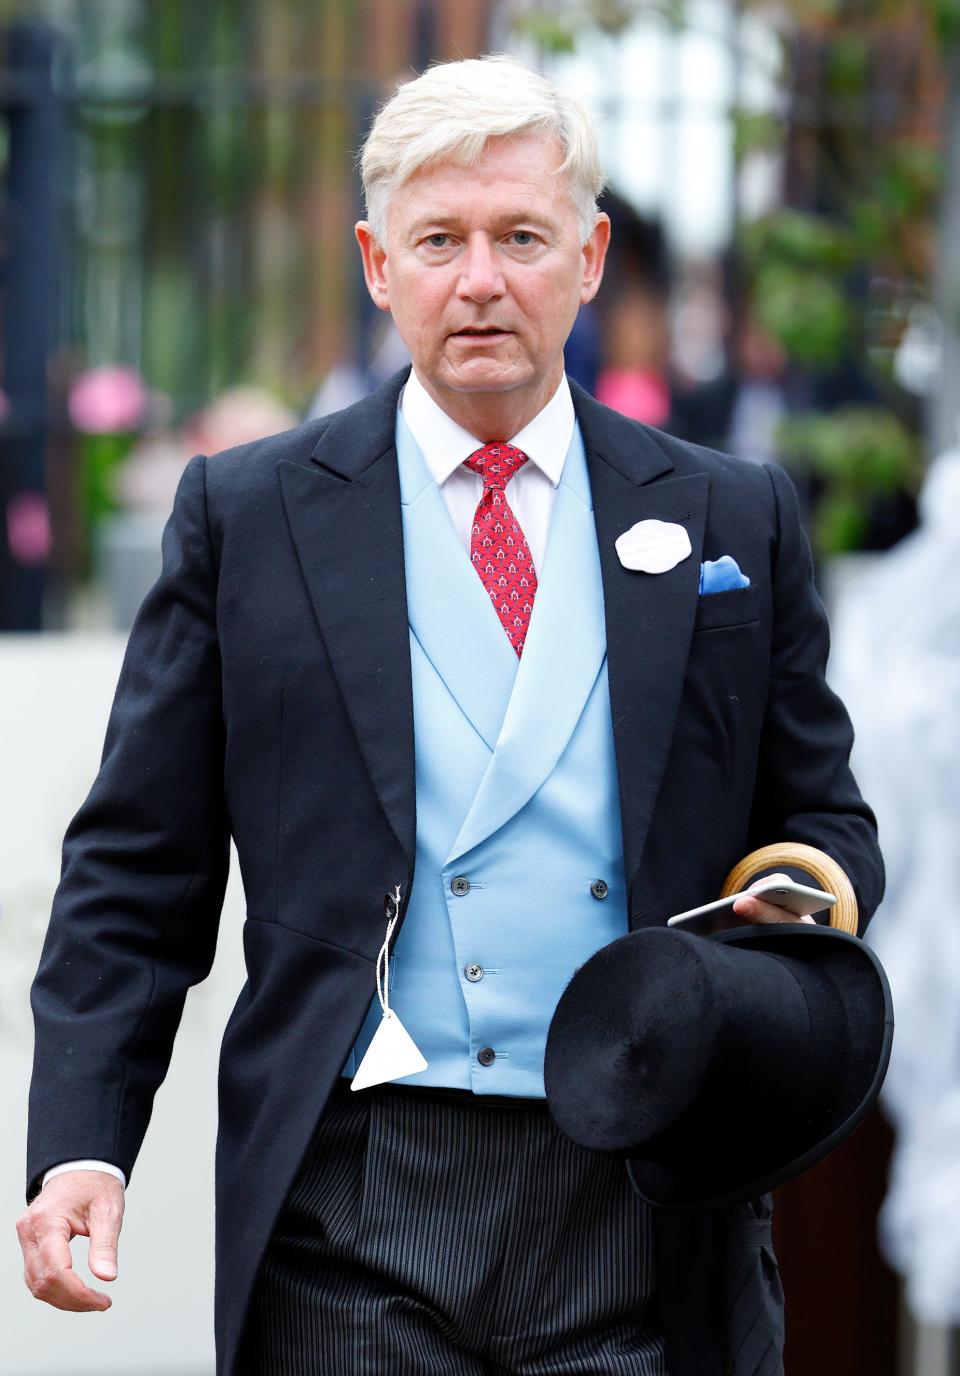 Sir Clive Alderton attends Royal Ascot at Ascot Racecourse on June 18, 2022, in Ascot, England.